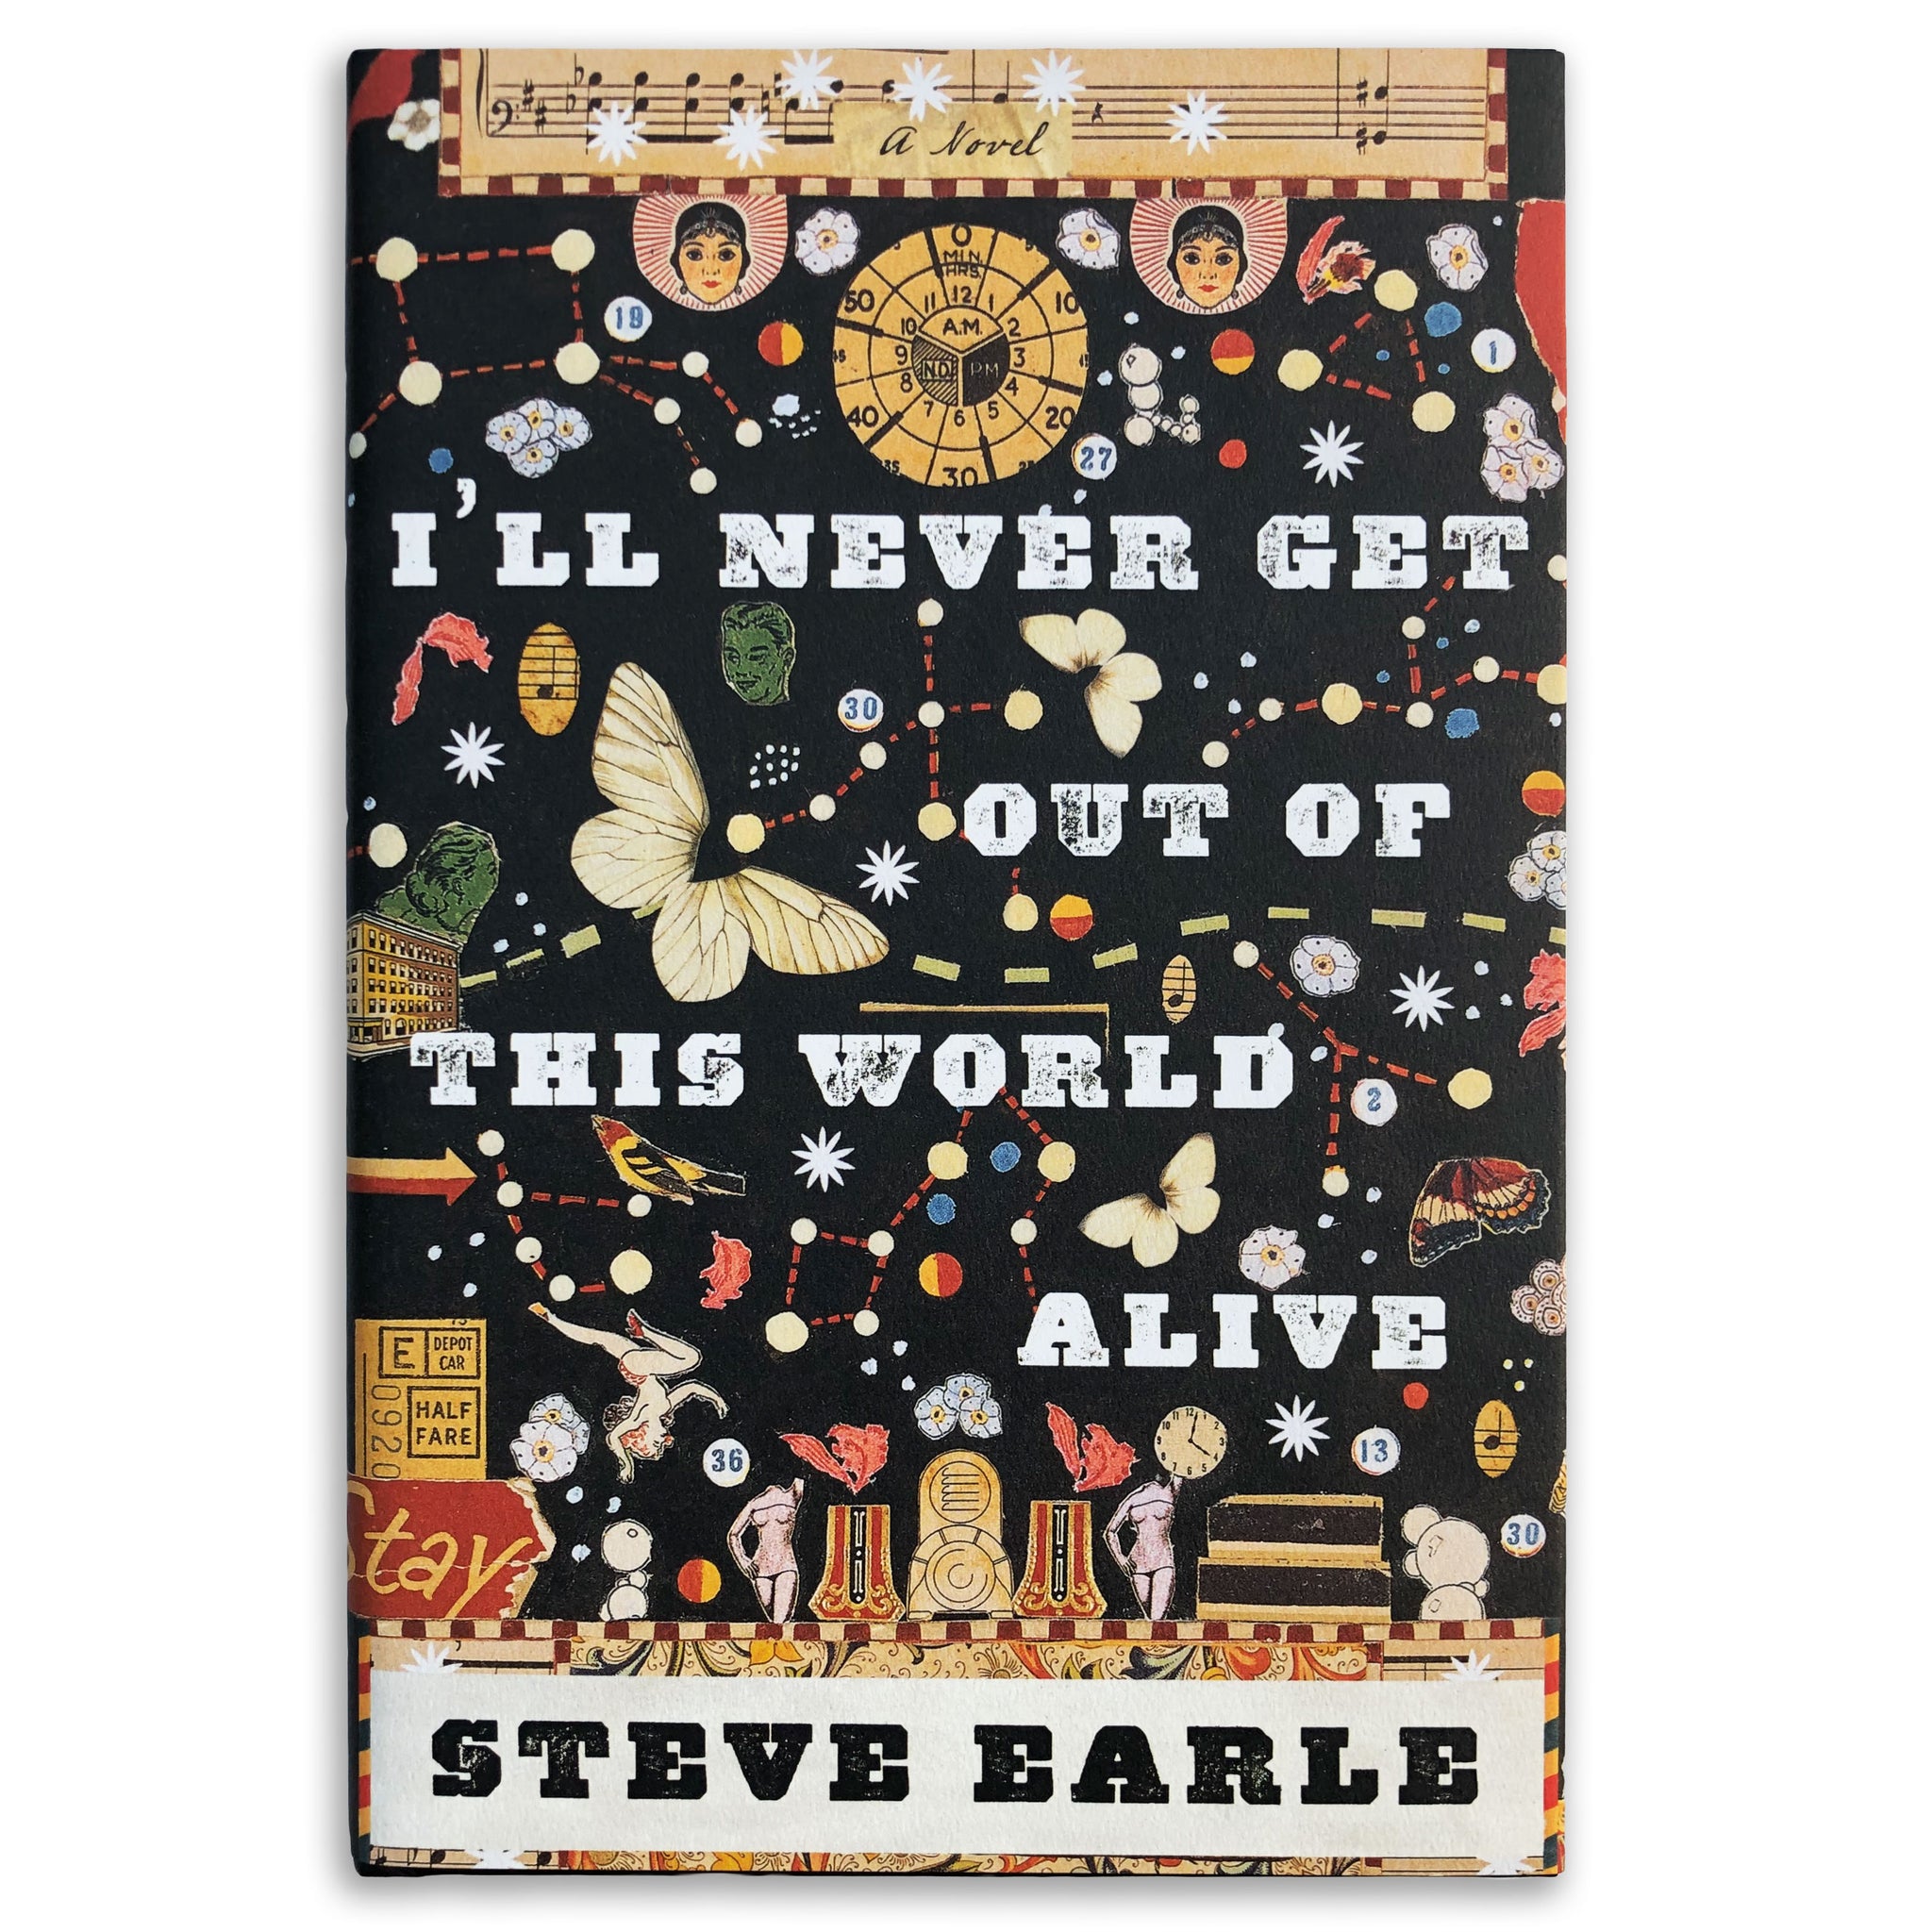 Steve Earle - I'll Never Get Out Of This World Alive Book